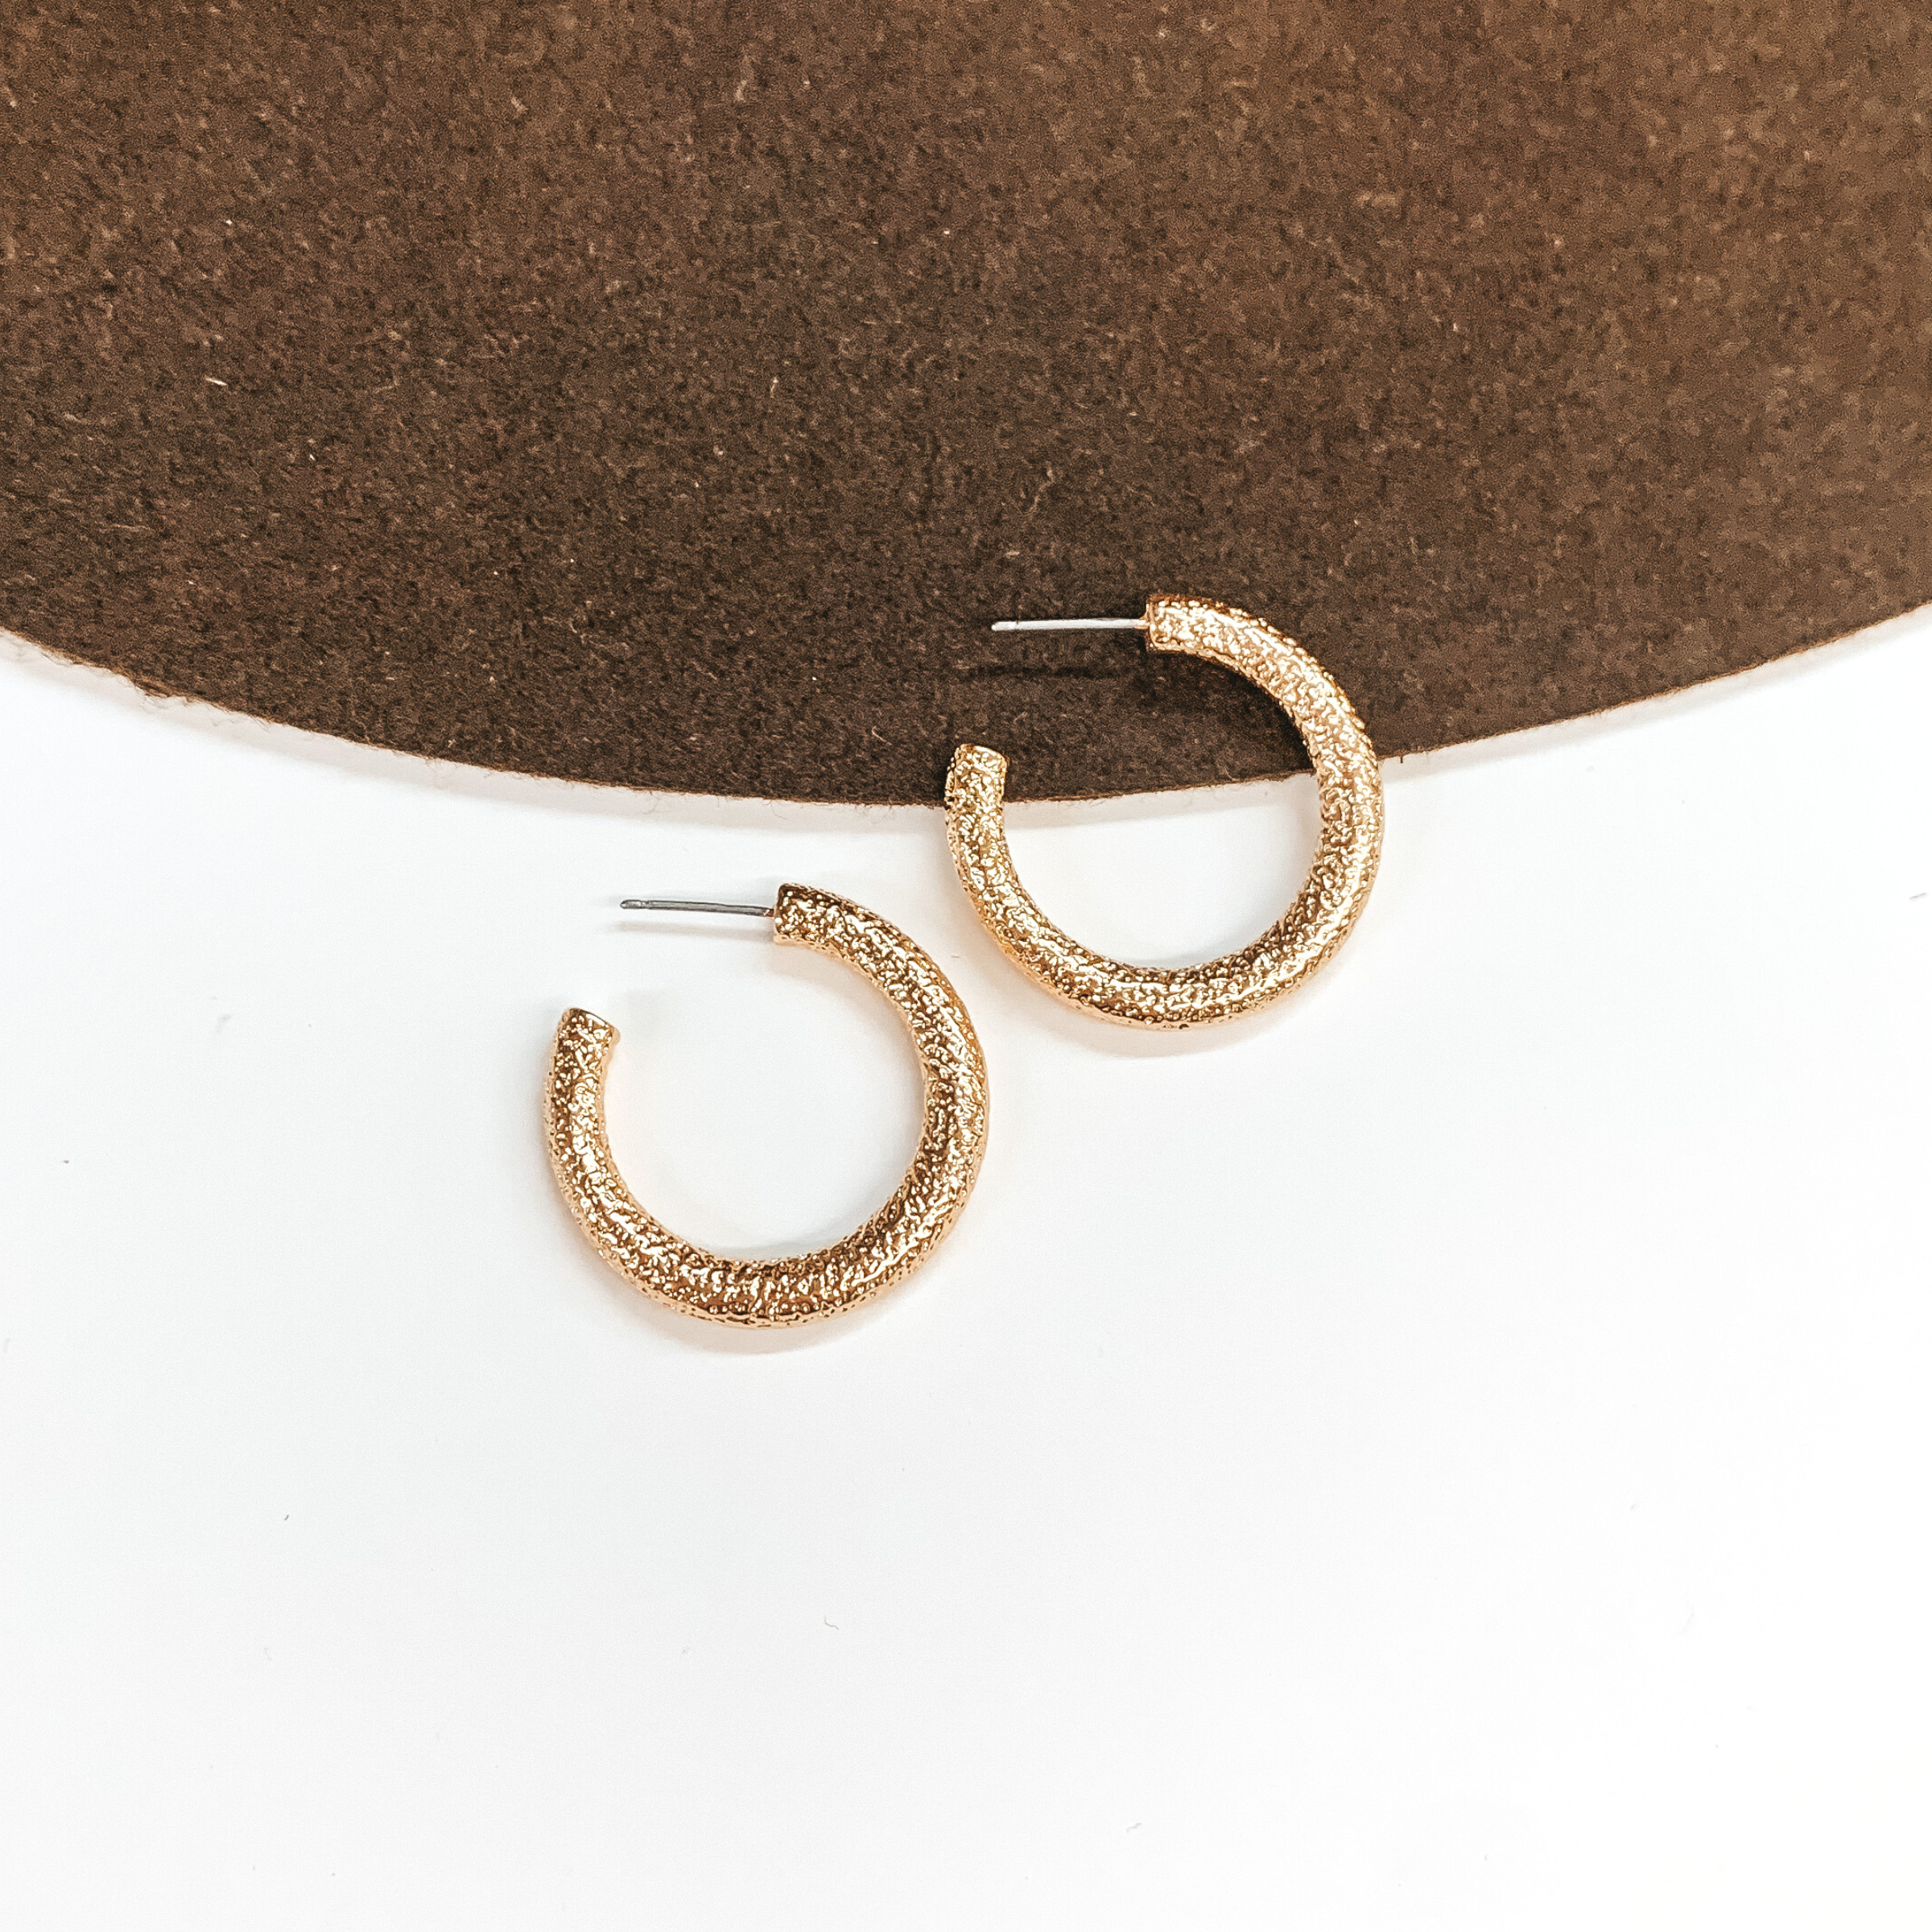 Textured Small Sized Hoop Earrings in Gold - Giddy Up Glamour Boutique